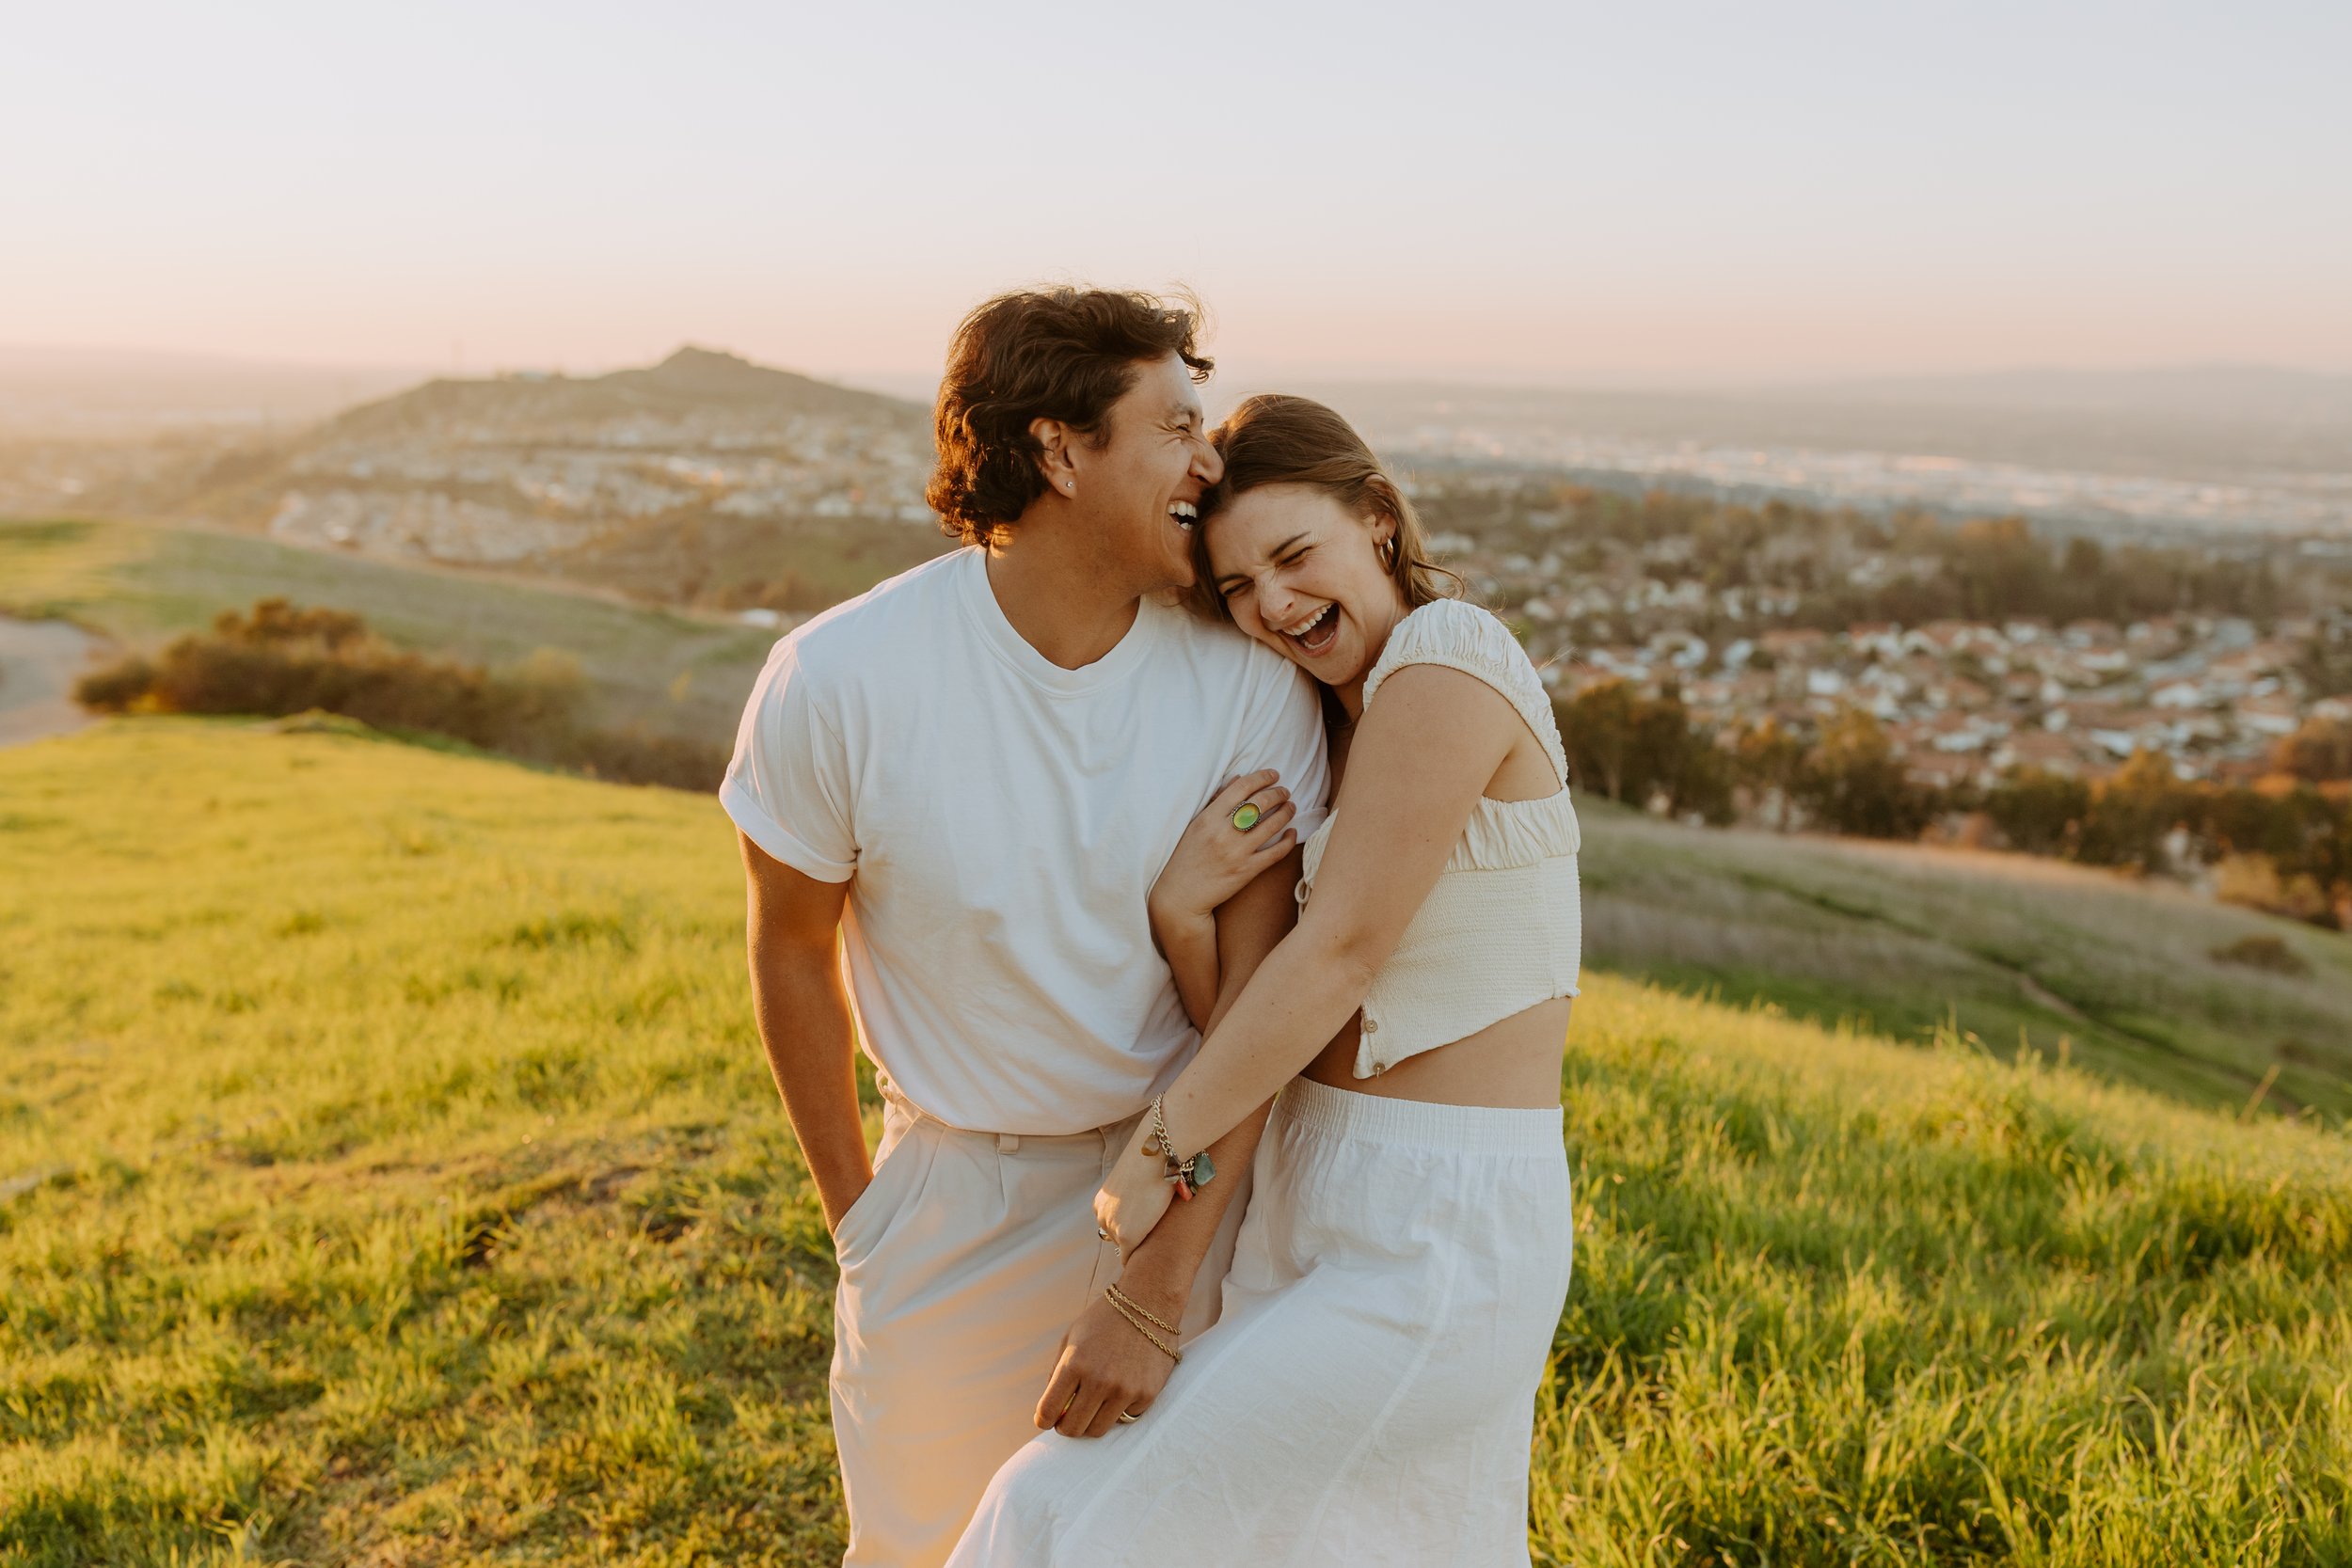 elopement wedding san diego engagement couples photographer socal candid natural warm happy